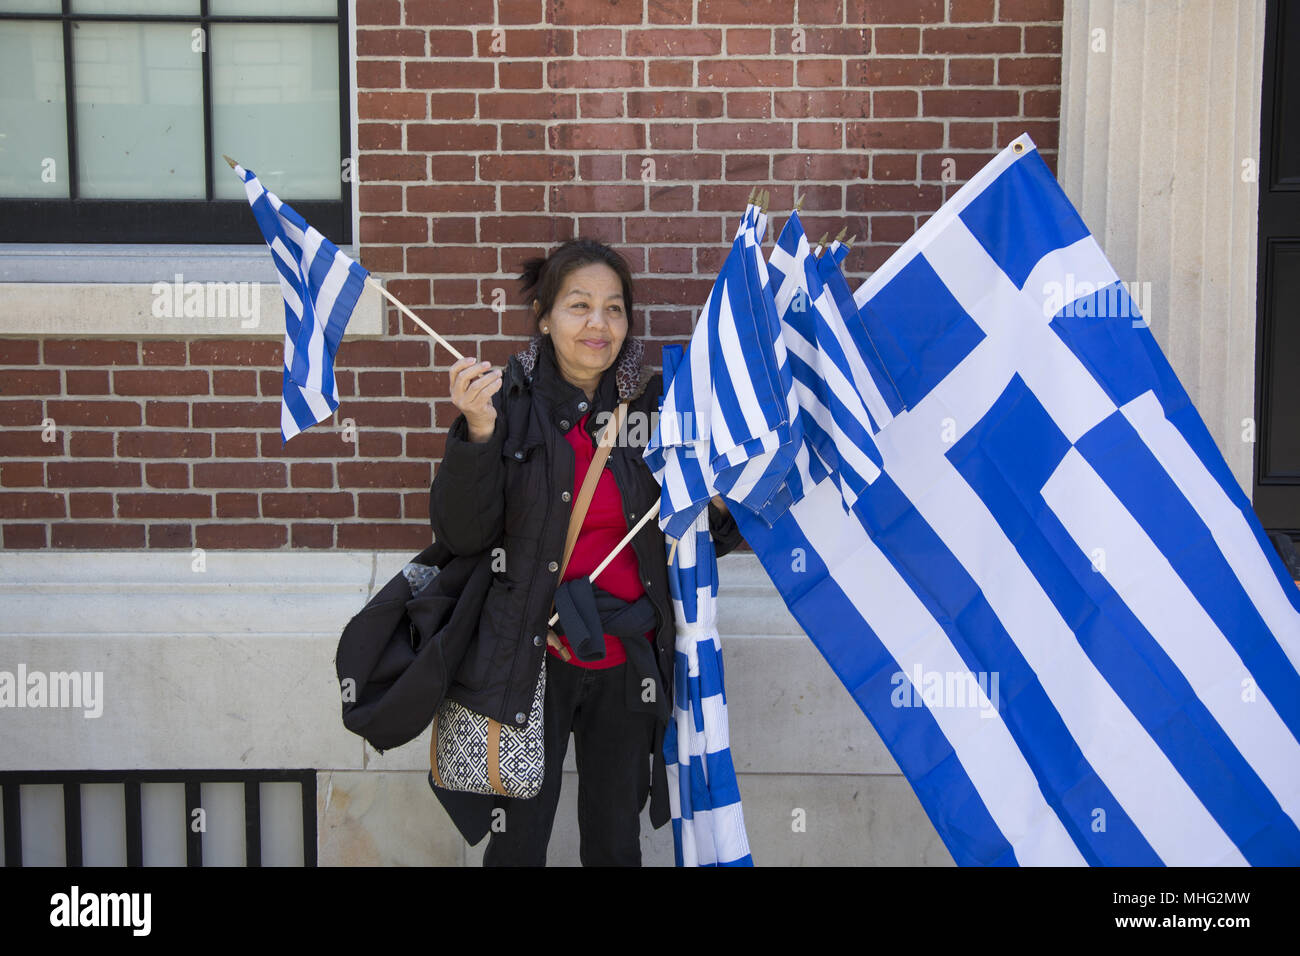 Greek Independence Day Parade in New York City. Vendor sells Greek Flags at the parade. Stock Photo